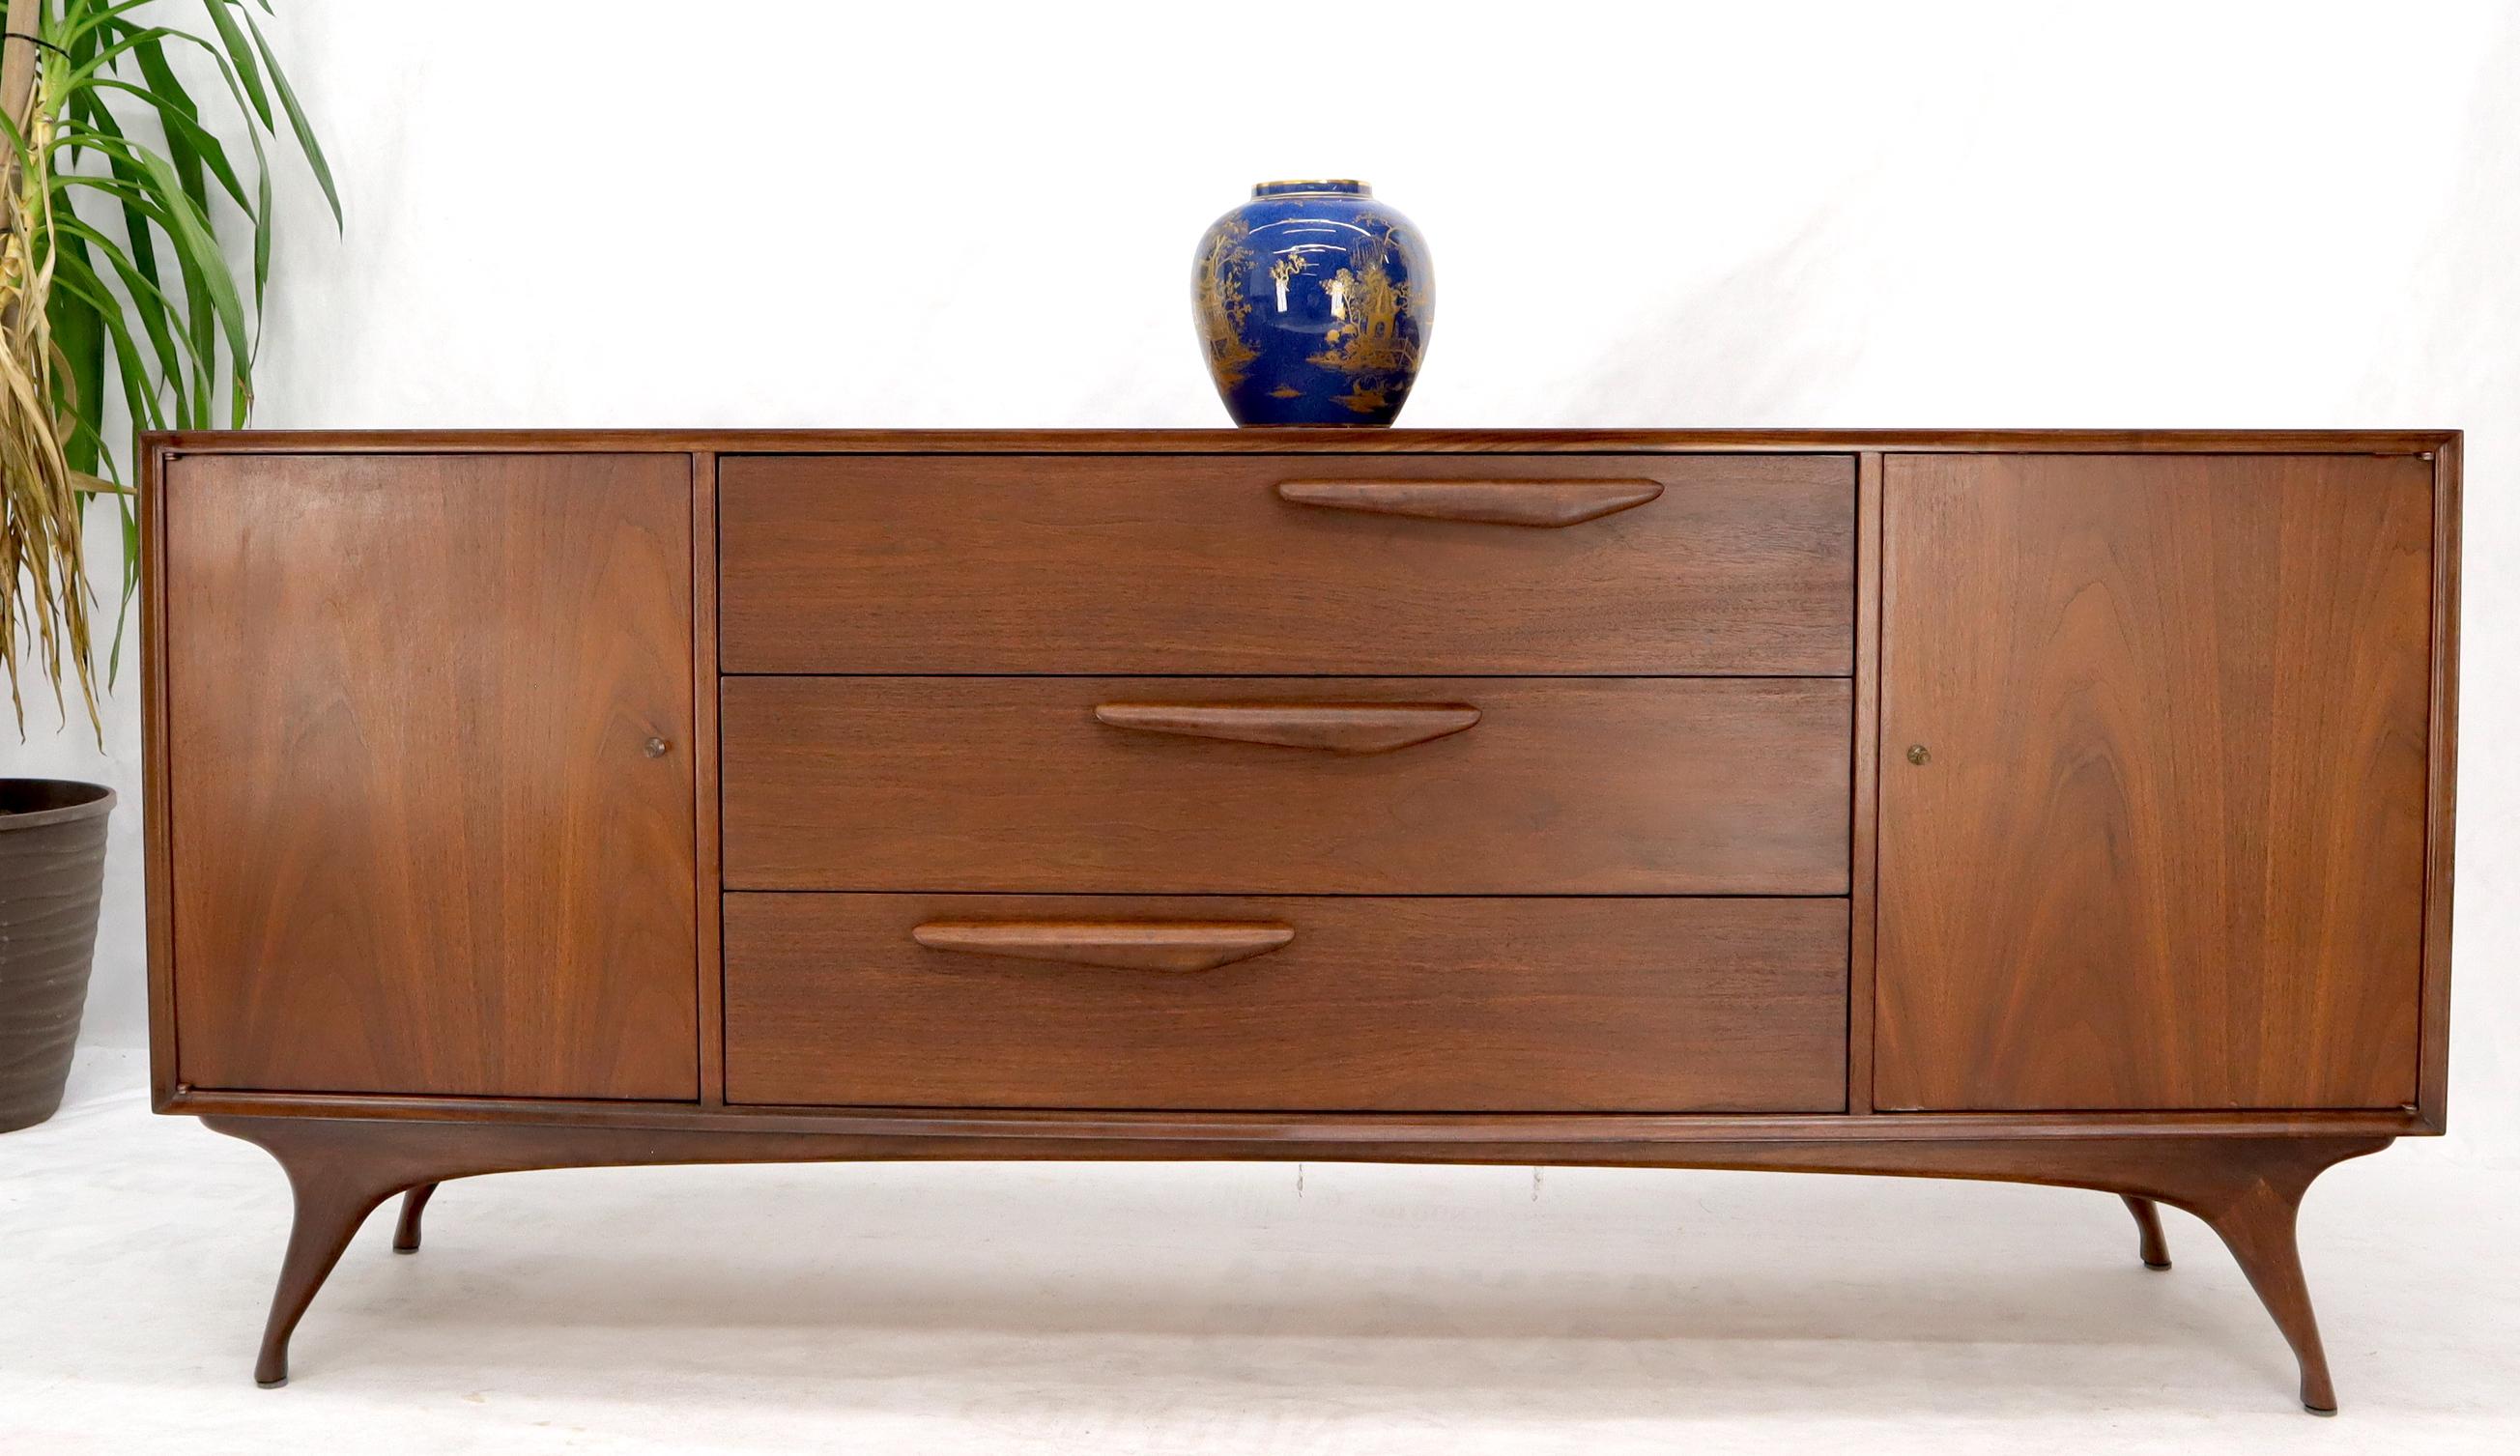 20th Century Sculptural Legs Long 9 Drawers Walnut Credenza Dresser with Doors For Sale